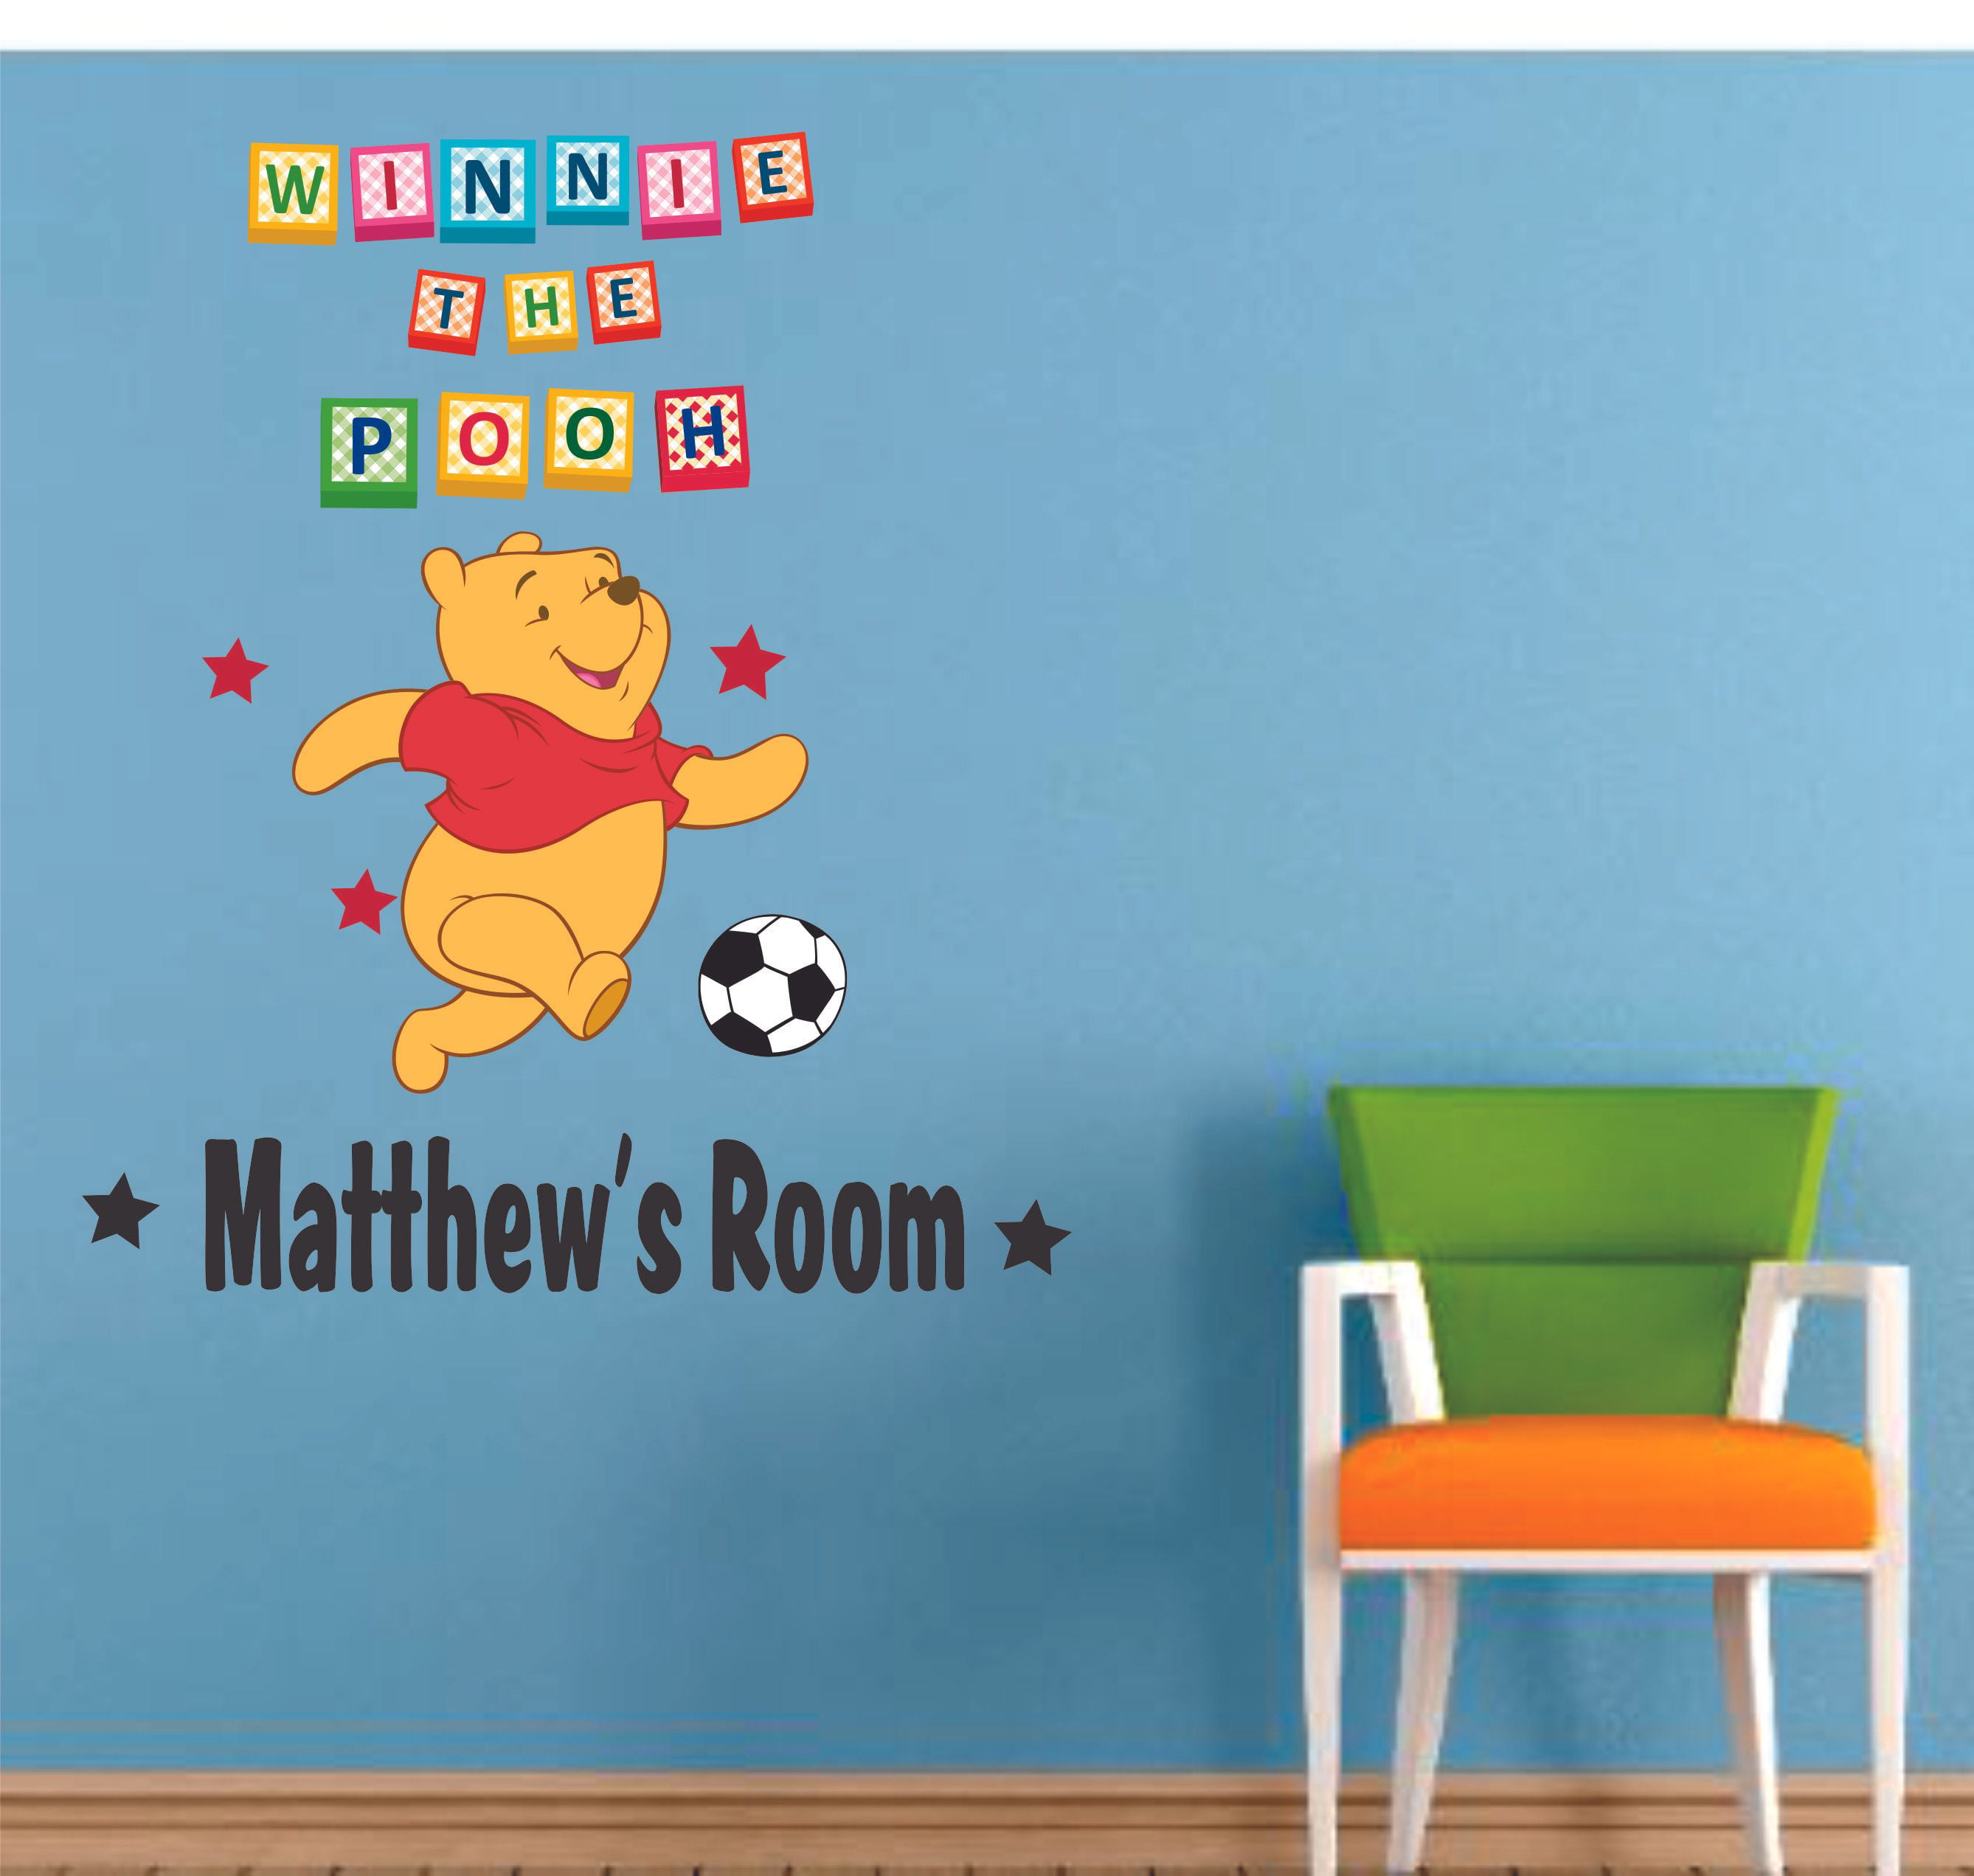 Winnie the Pooh Group Self Adhesive Wall Sticker Decal Print Multi Sizes** 